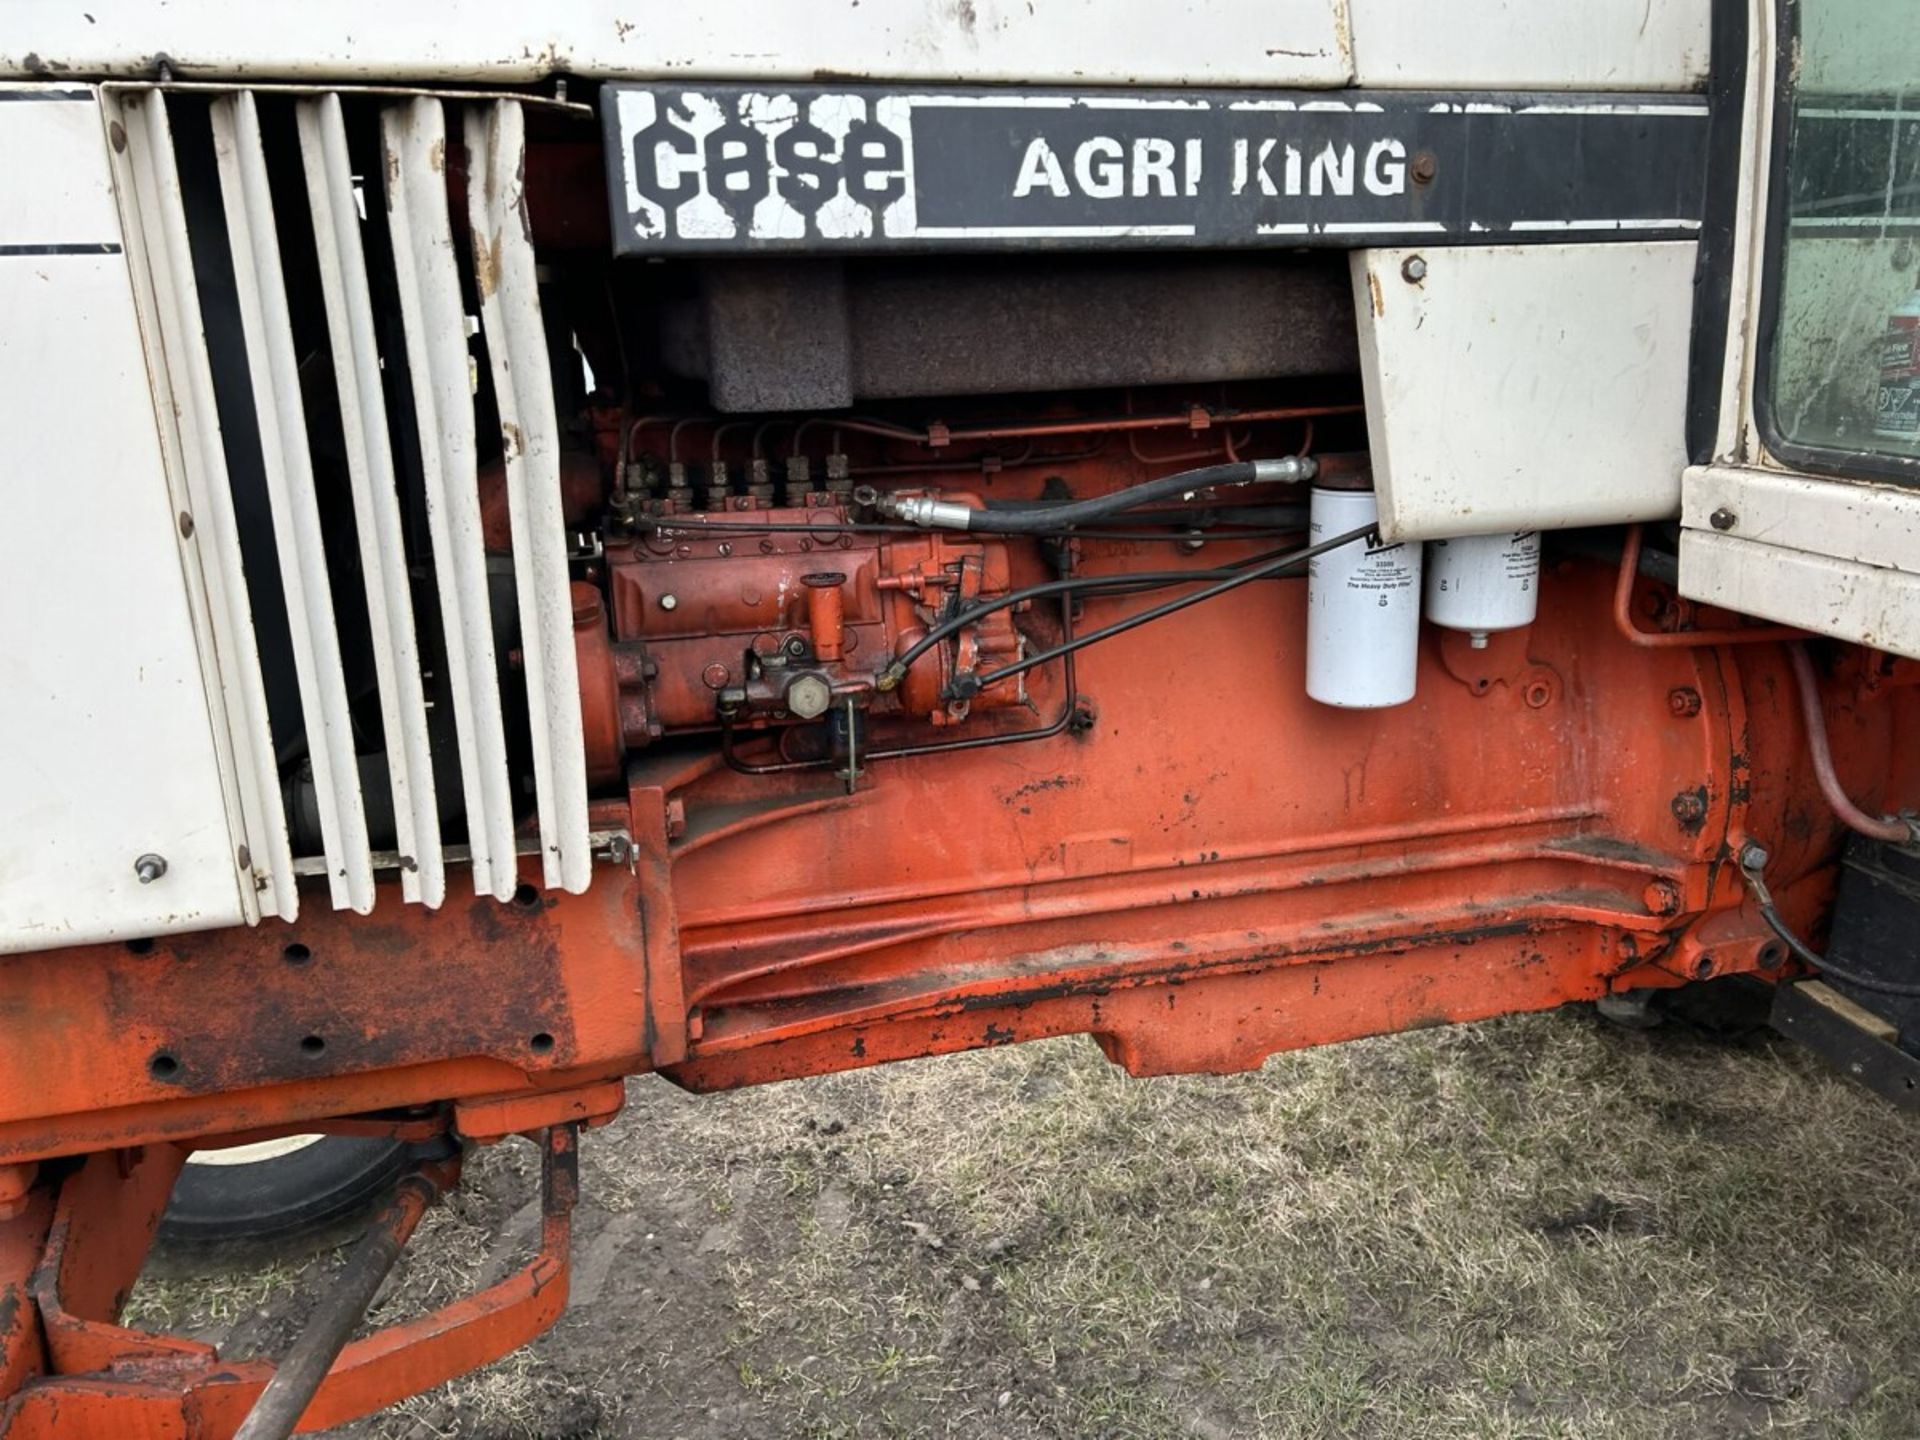 CASE AGRI KING 970 2WD TRACTOR, POWER SHIFT, 2-REMOTE HYD., 3-PT. HITCH, 540/1000 PTO, 20.8X34 - Image 3 of 13